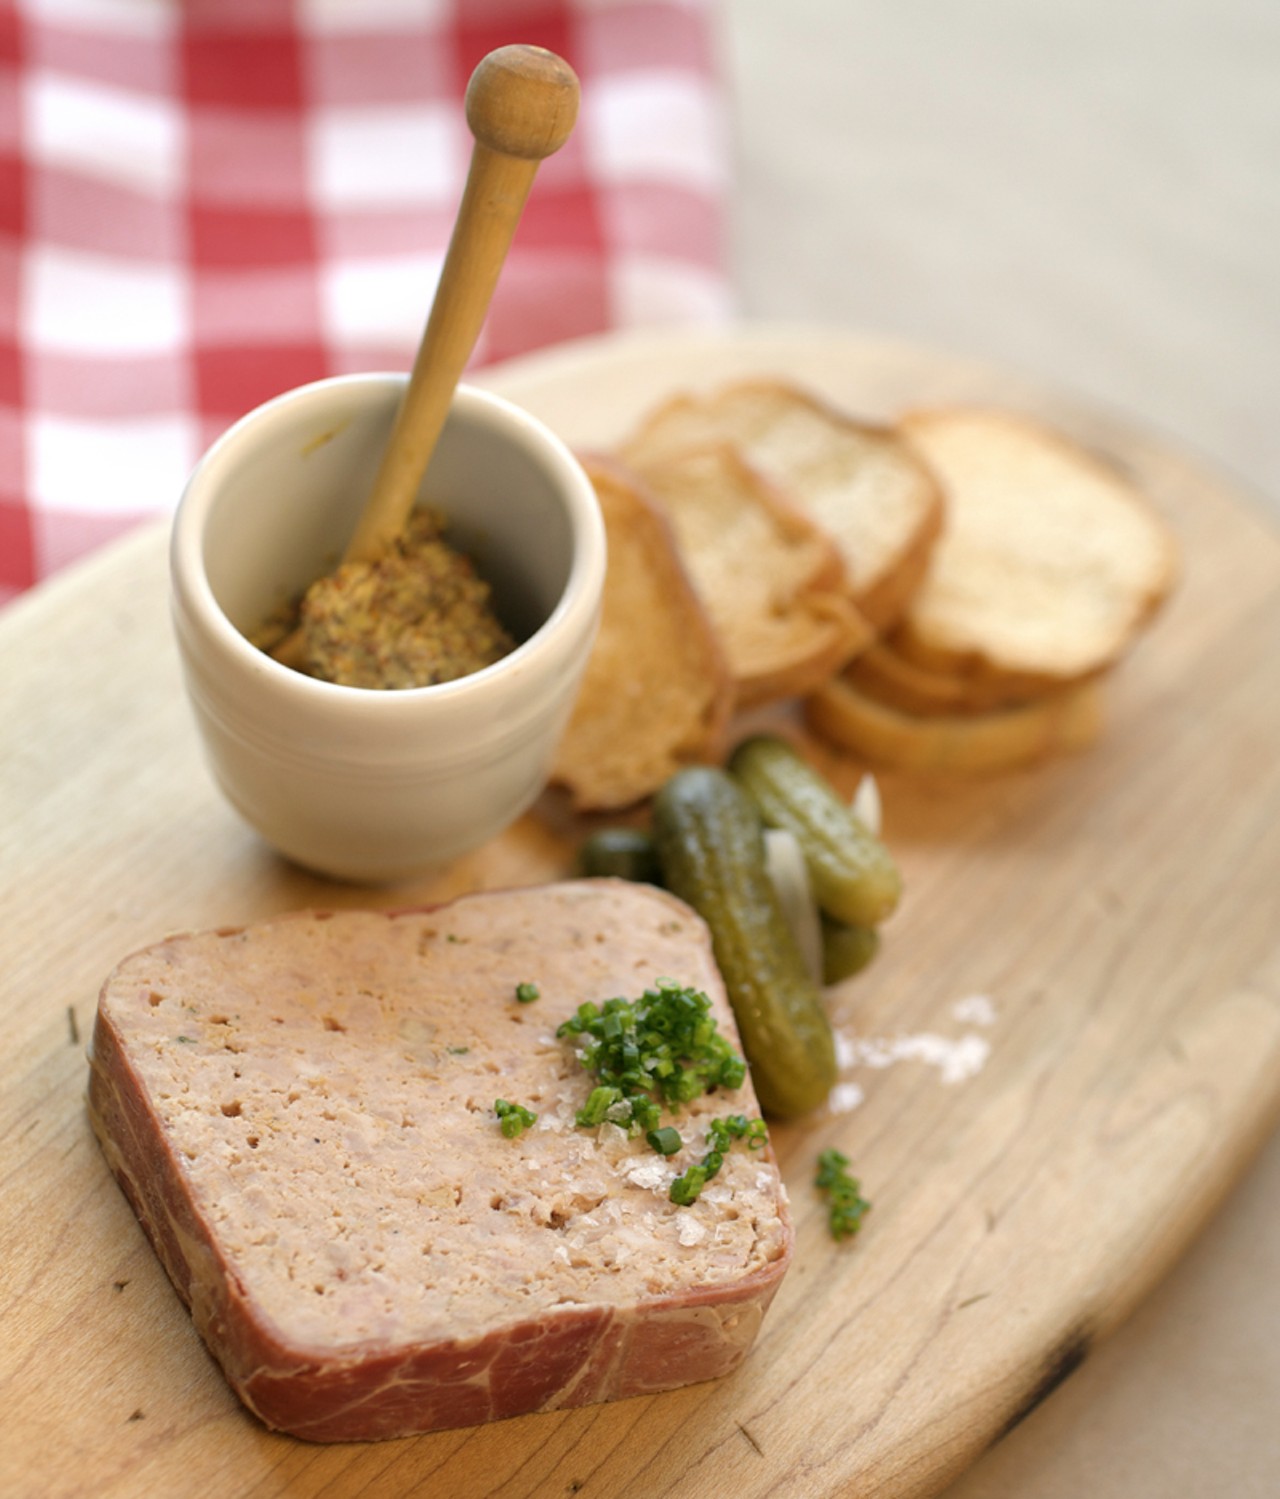 One of the hors d&rsquo;oeuvres is the country p&acirc;t&eacute;. Served with grain mustard.